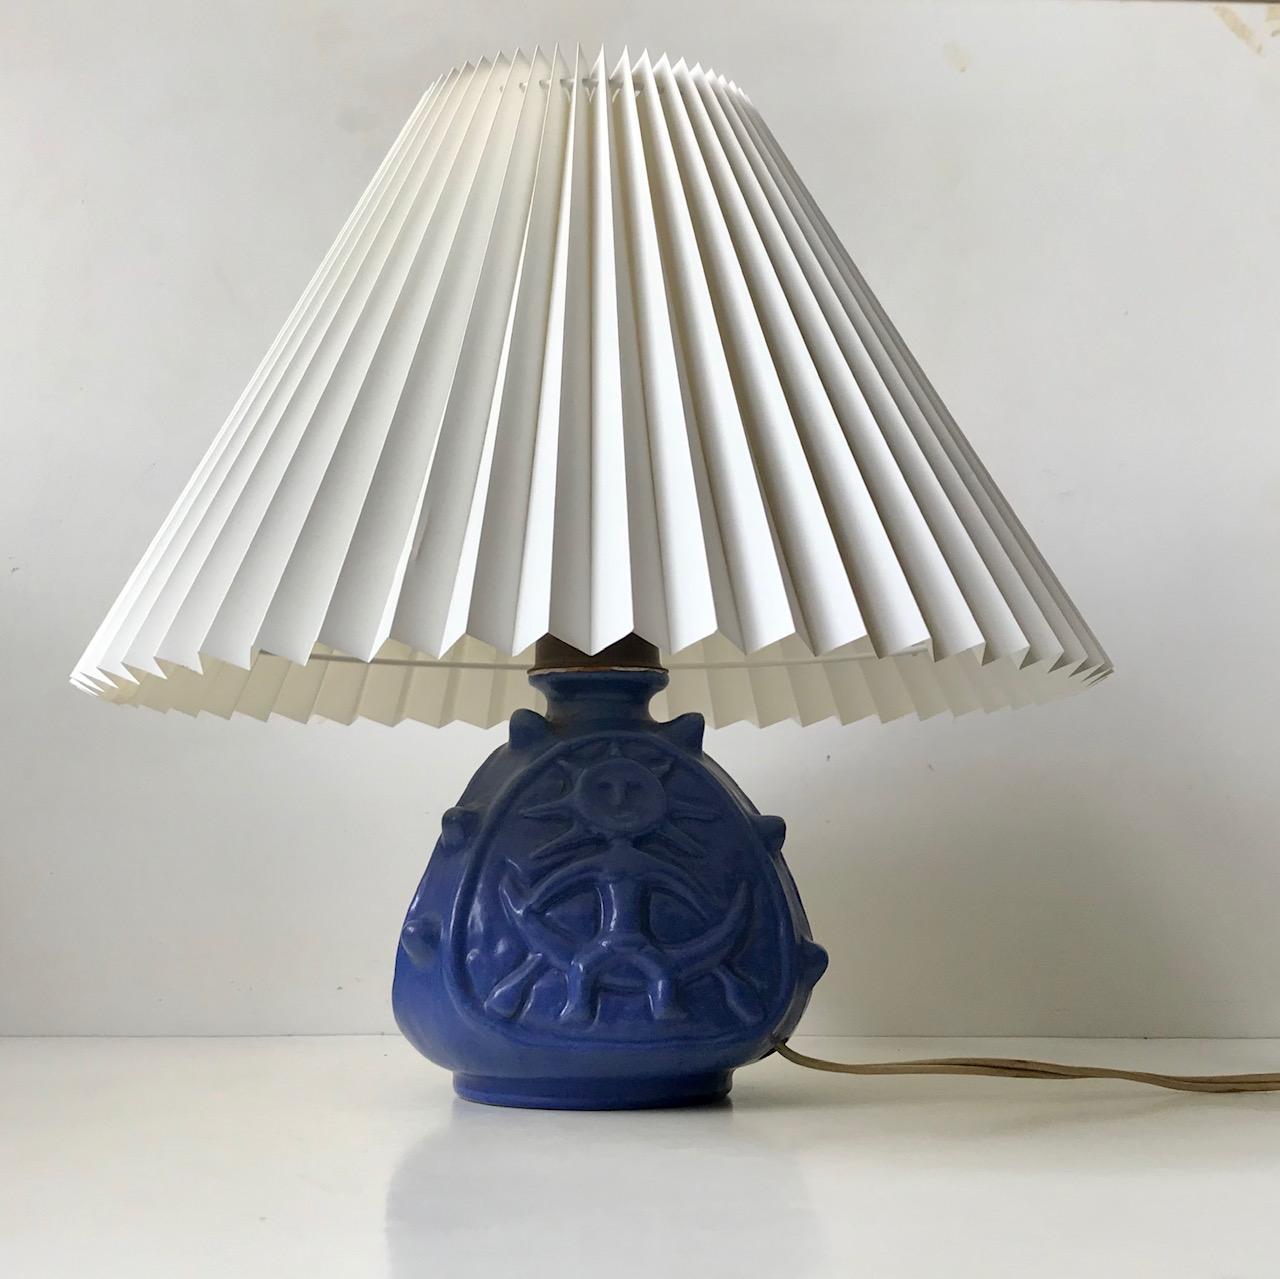 Glazed Spiky Blue Ceramic Table Lamp with Troll by Lauritz Hjorth, 1940s For Sale